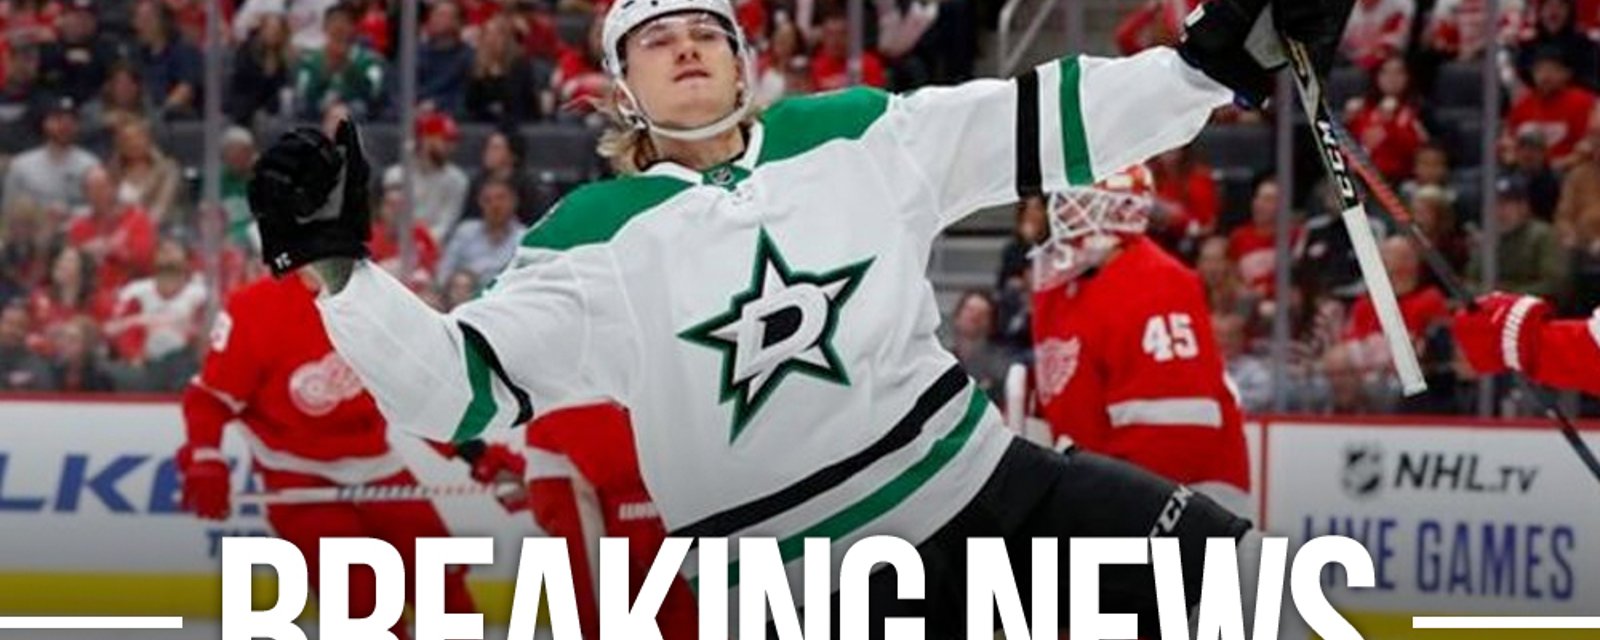 Roope Hintz signs a big time, $9 million+ deal!